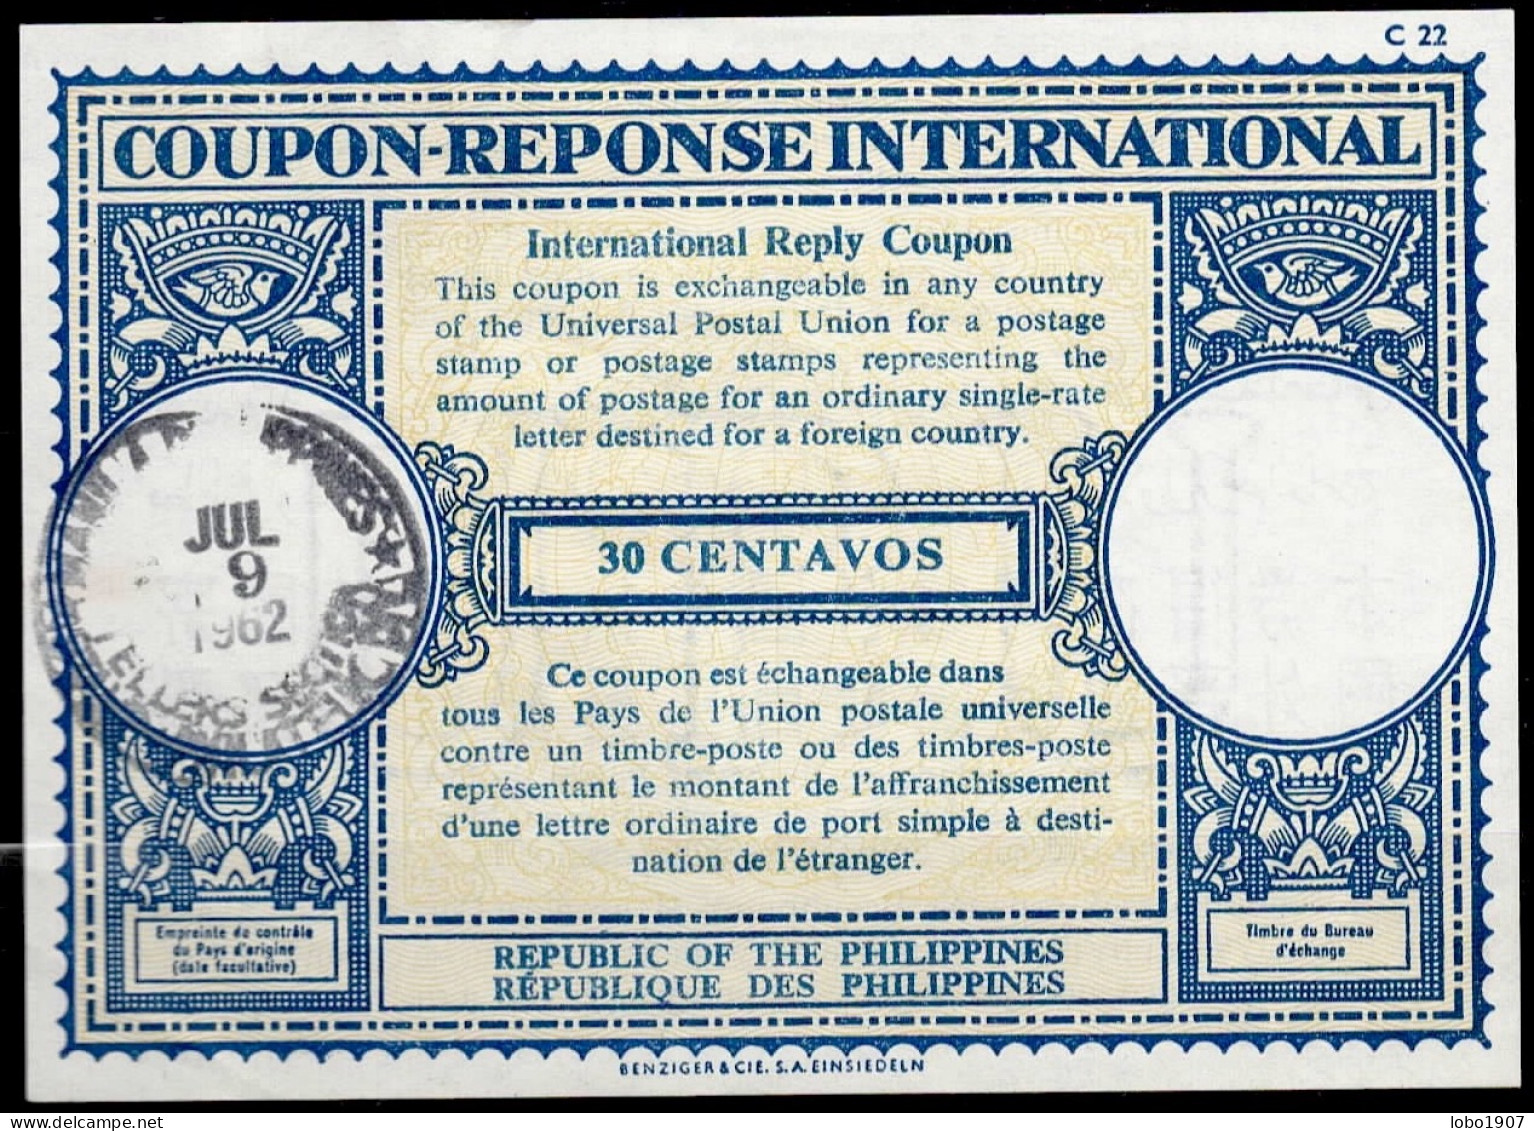 PHILIPPINES  Collection 15 International Reply Coupon Reponse Cupon Respuesta IRC IAS see list and scans